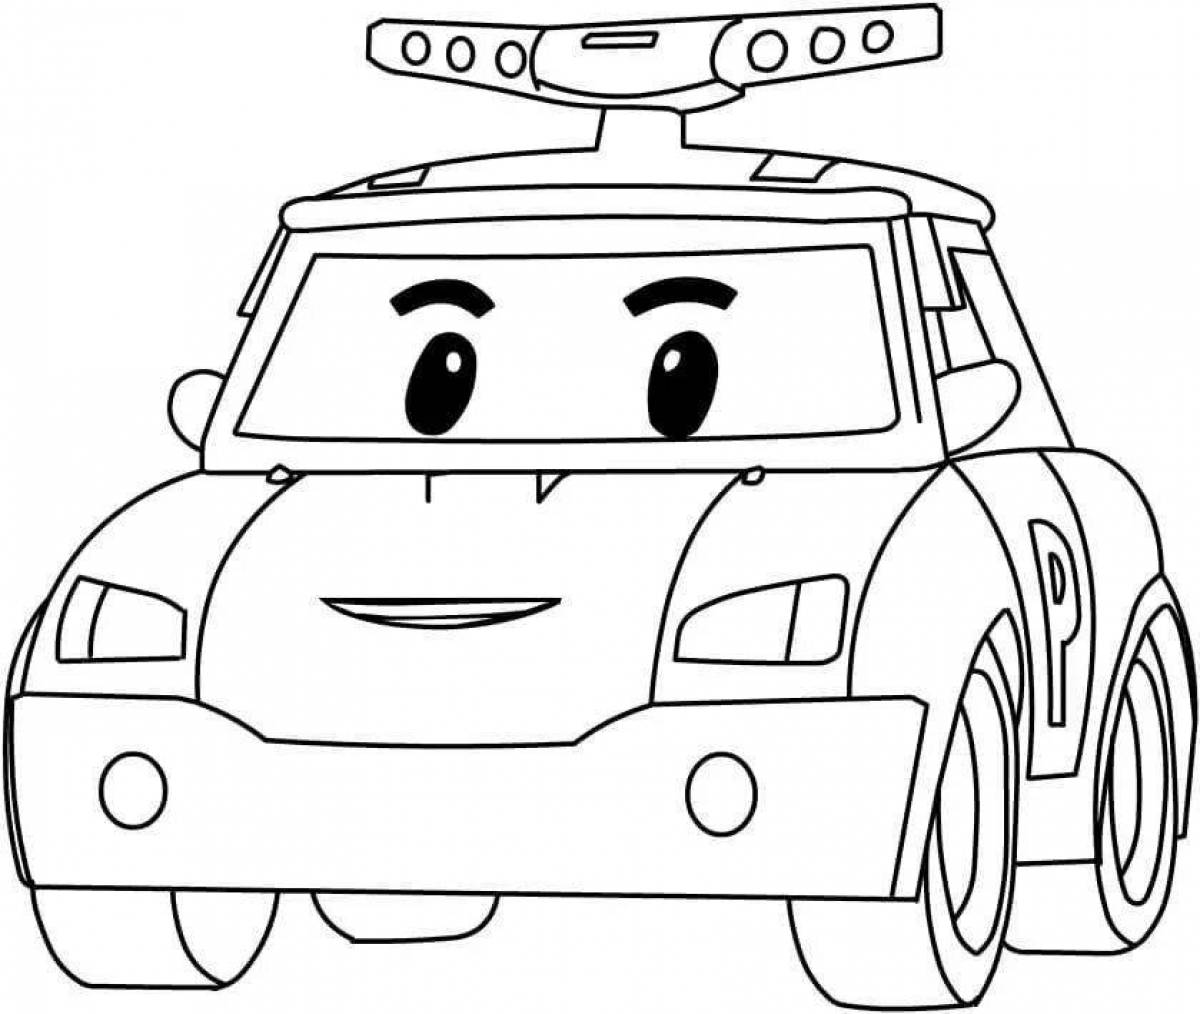 Polyrabocar awesome coloring book